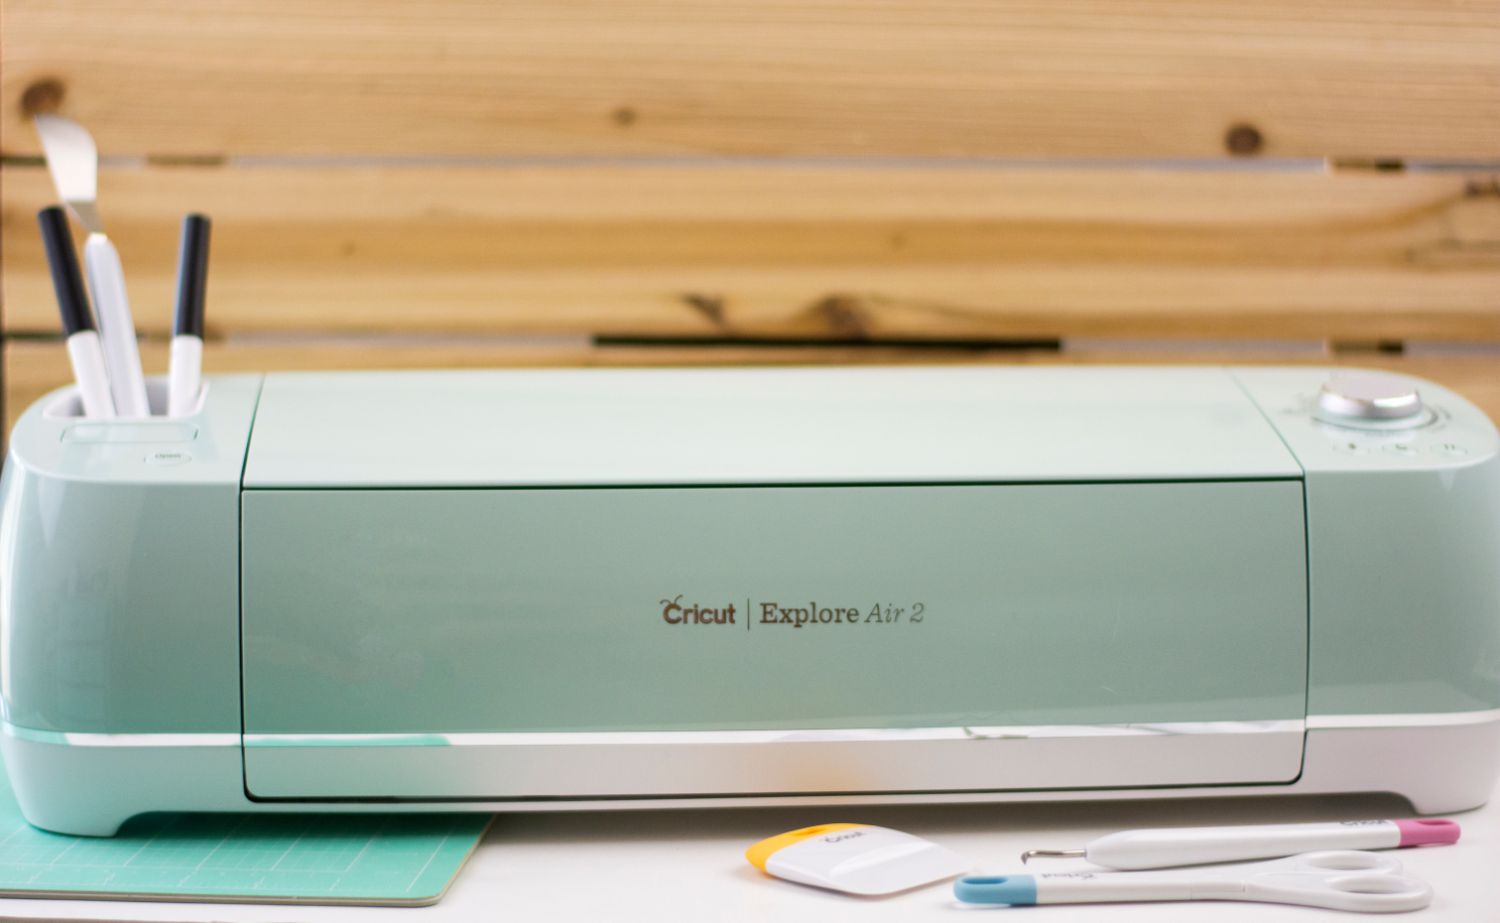 Cricut explore air 2's multiple cutting modes give you even more freed...